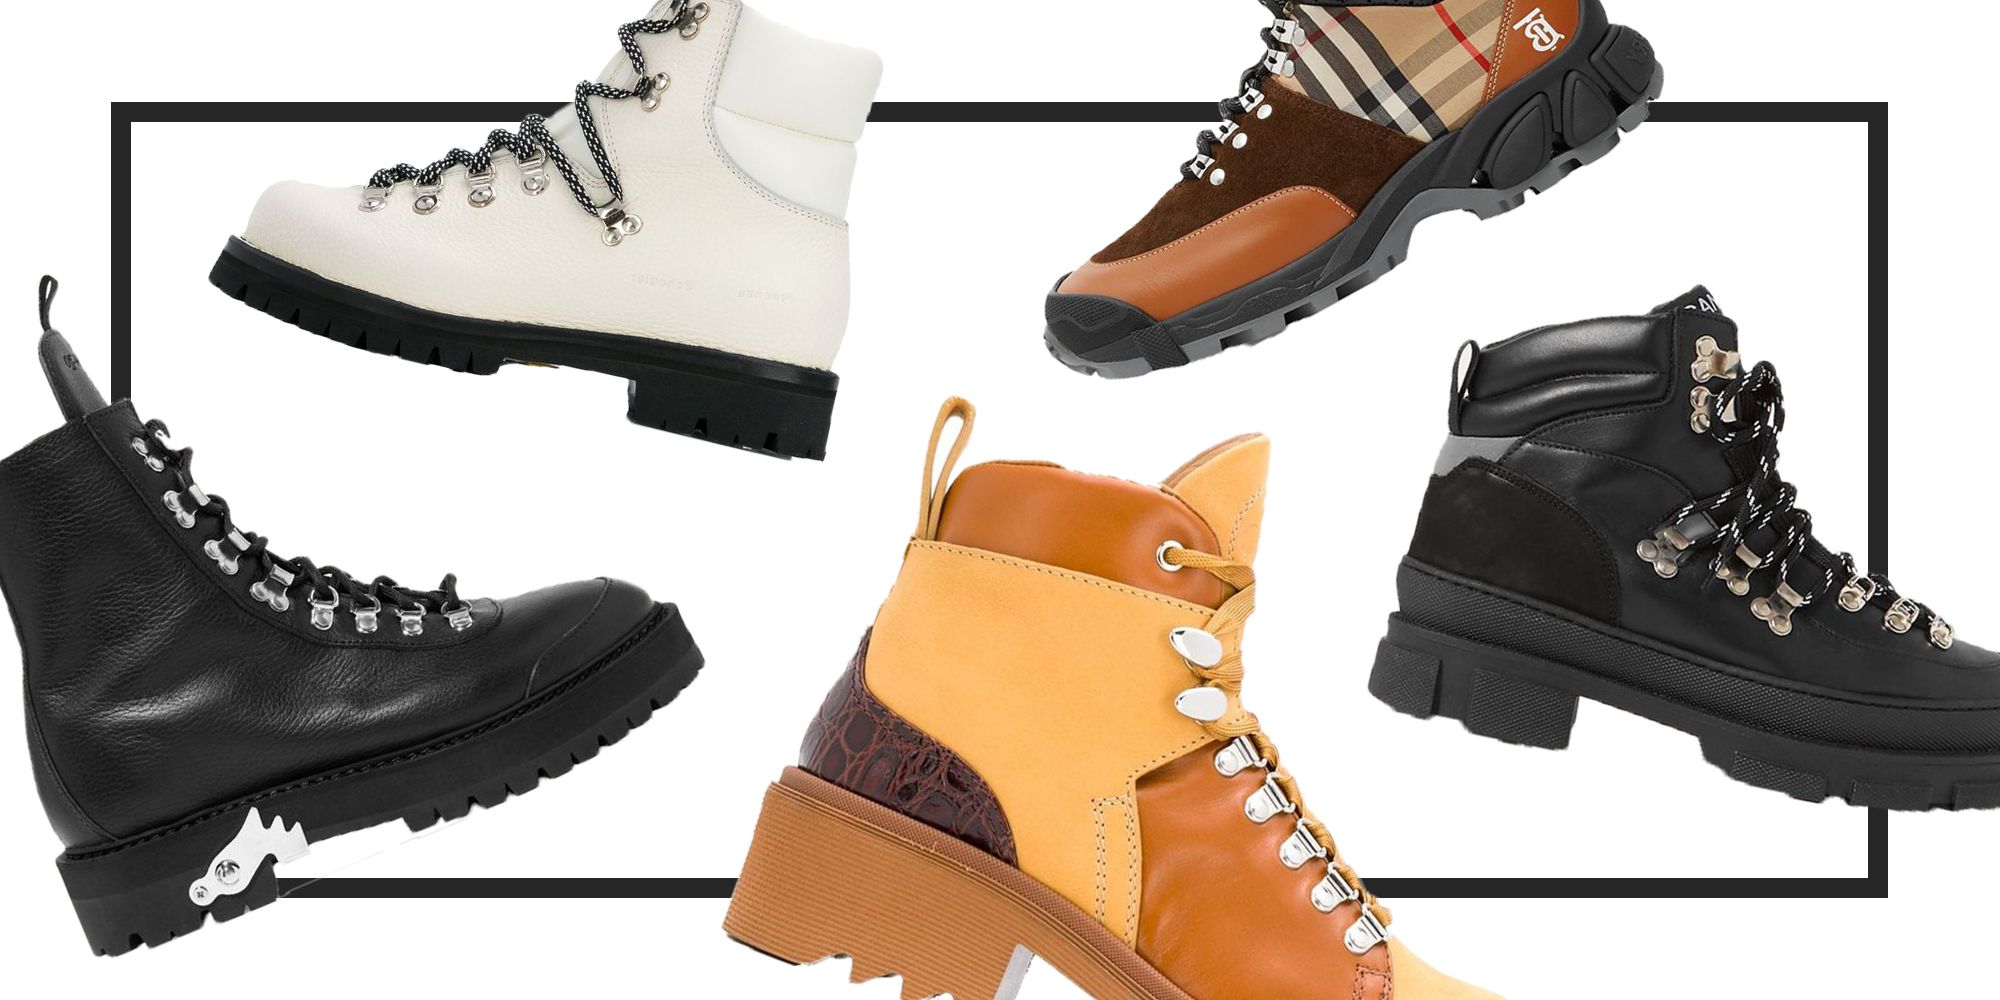 Best fashion hiking boots - boot trend 2020